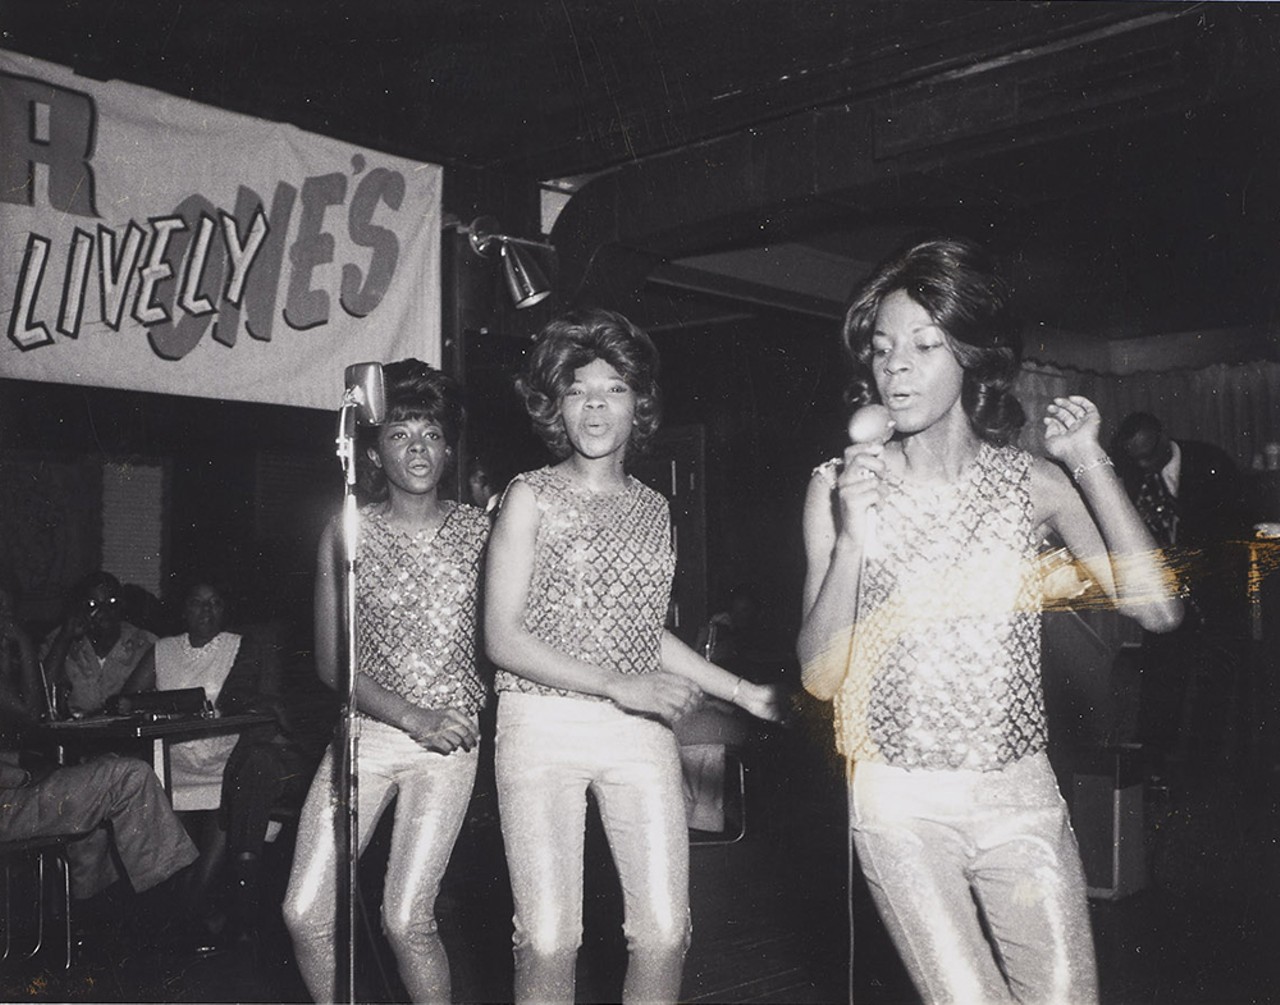 Martha and the Vandellas at the Music Box in Cleveland, undated. (Photo by Jimmy Baynes)